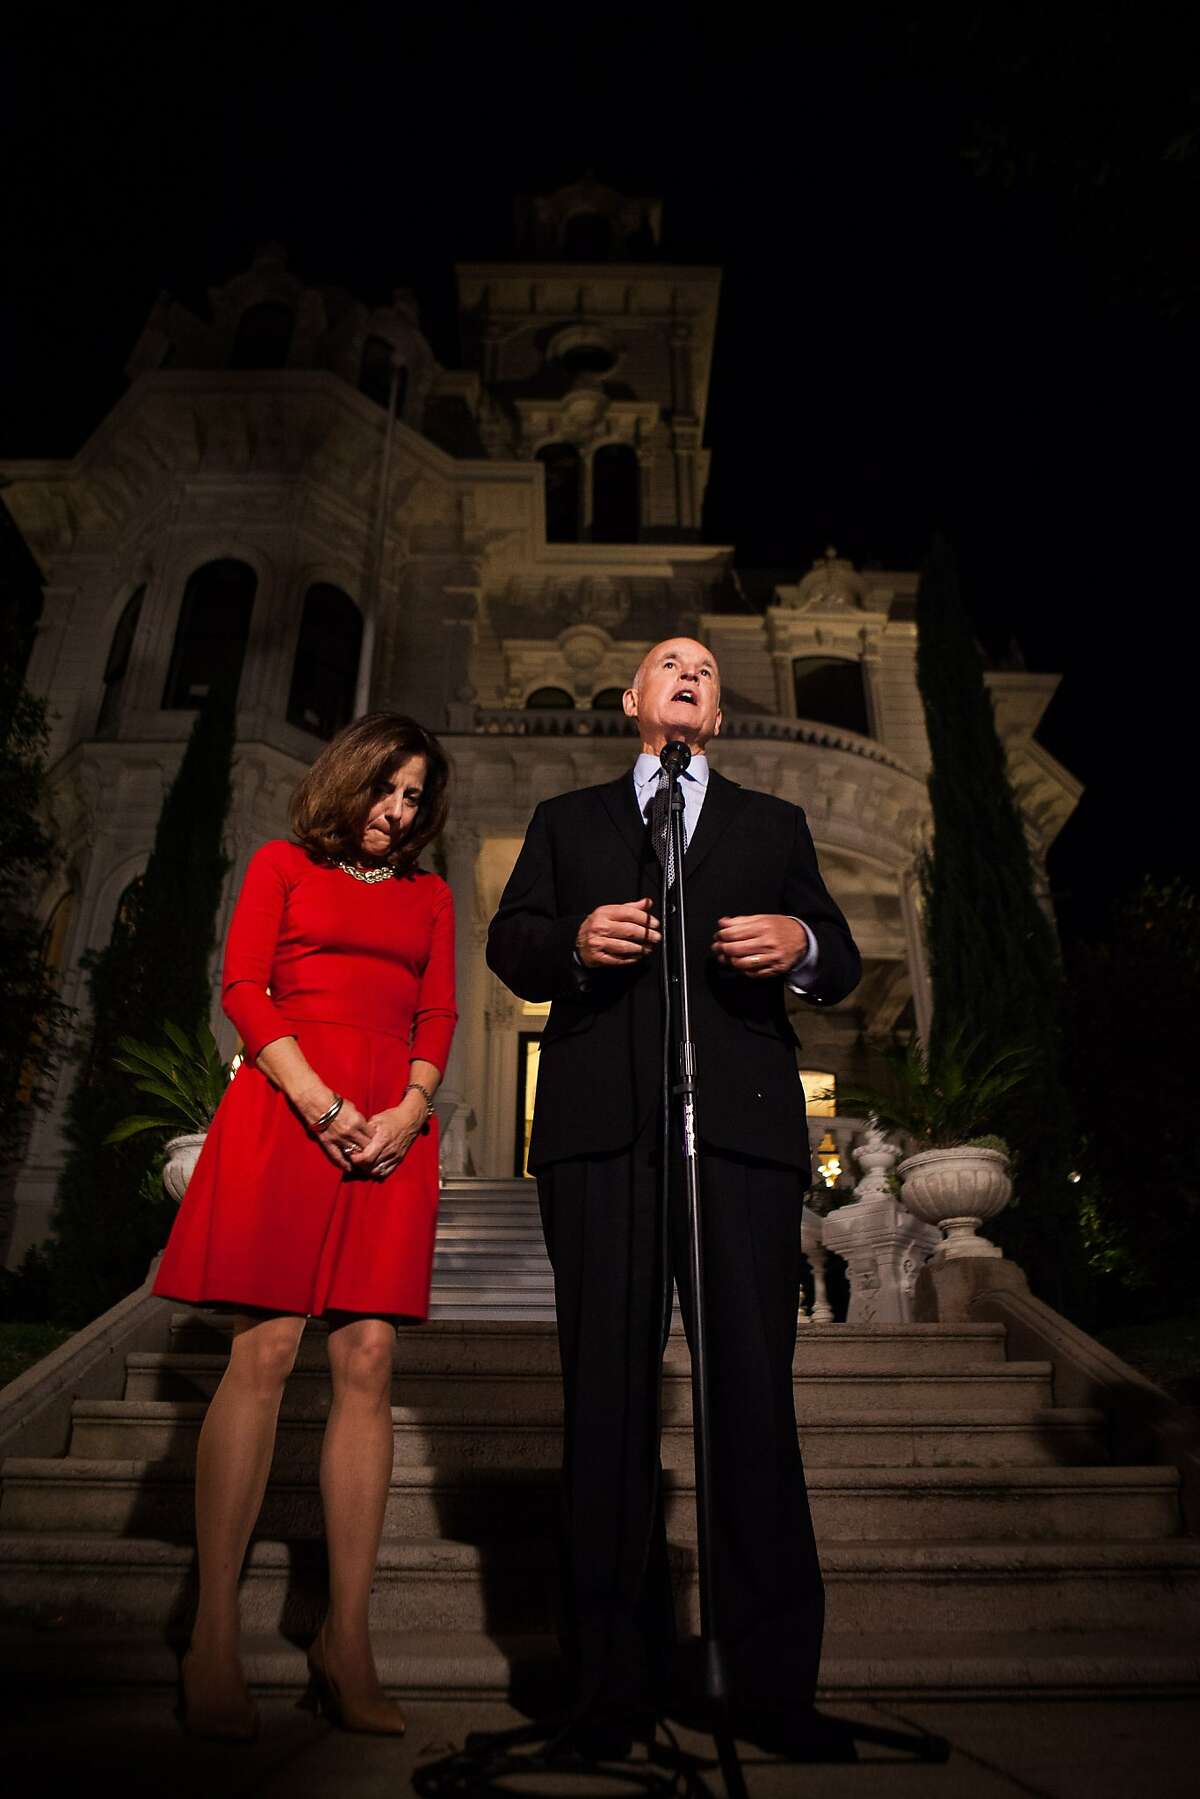 Gov. Jerry Brown, with Anne Gust Brown, speaks to the media after being reelected to a fourth term in front of the Governor's Mansion in Sacramento, California, November 4, 2014.